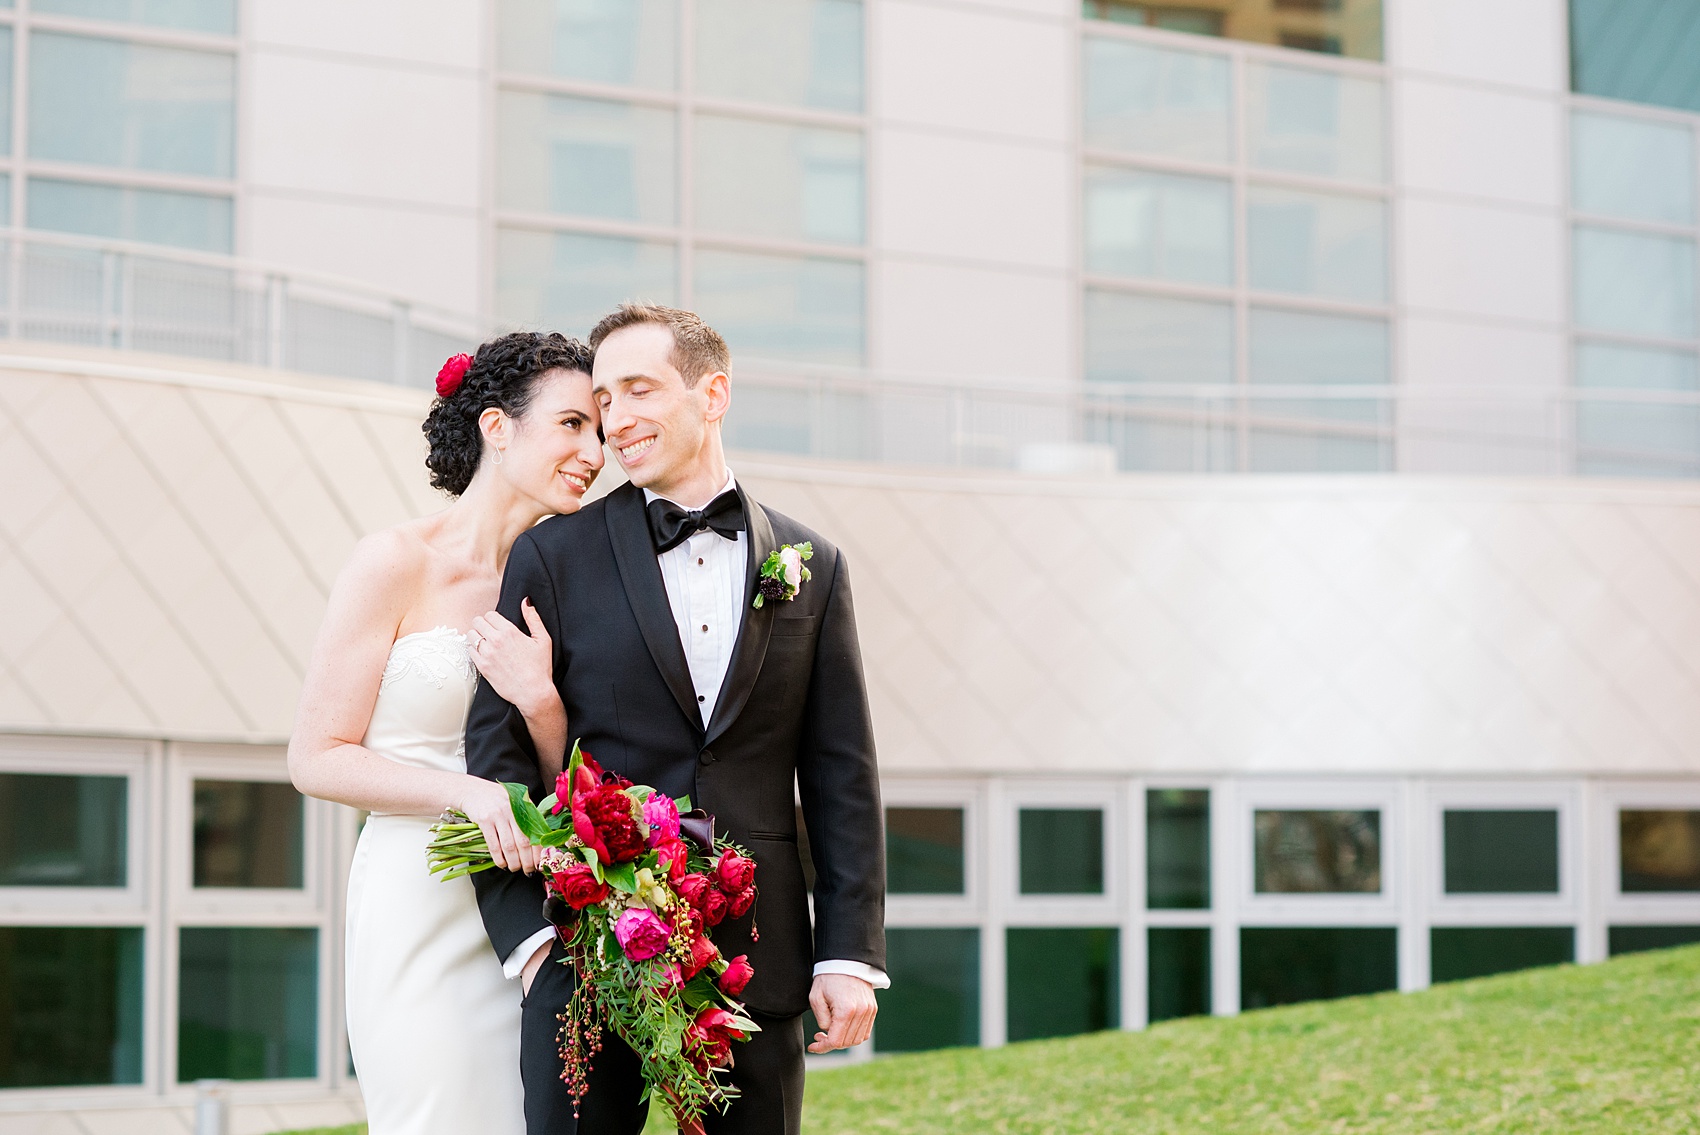 W Hoboken wedding photos by Mikkel Paige Photography at this NJ venue. Pictures in this well known New Jersey city with a view of the NYC skyline. The bride and the groom wore romantic colors including burgundy, fuchsia, red and classic black. Flowers by Sachi Rose Design. #mikkelpaige #HobokenWedding #NewJerseyPhotographer #NewYorkCityPhotographer #NYCweddingphotographer #brideandgroomphotos #redpeonies #romanticwedding #springwedding #CityWedding